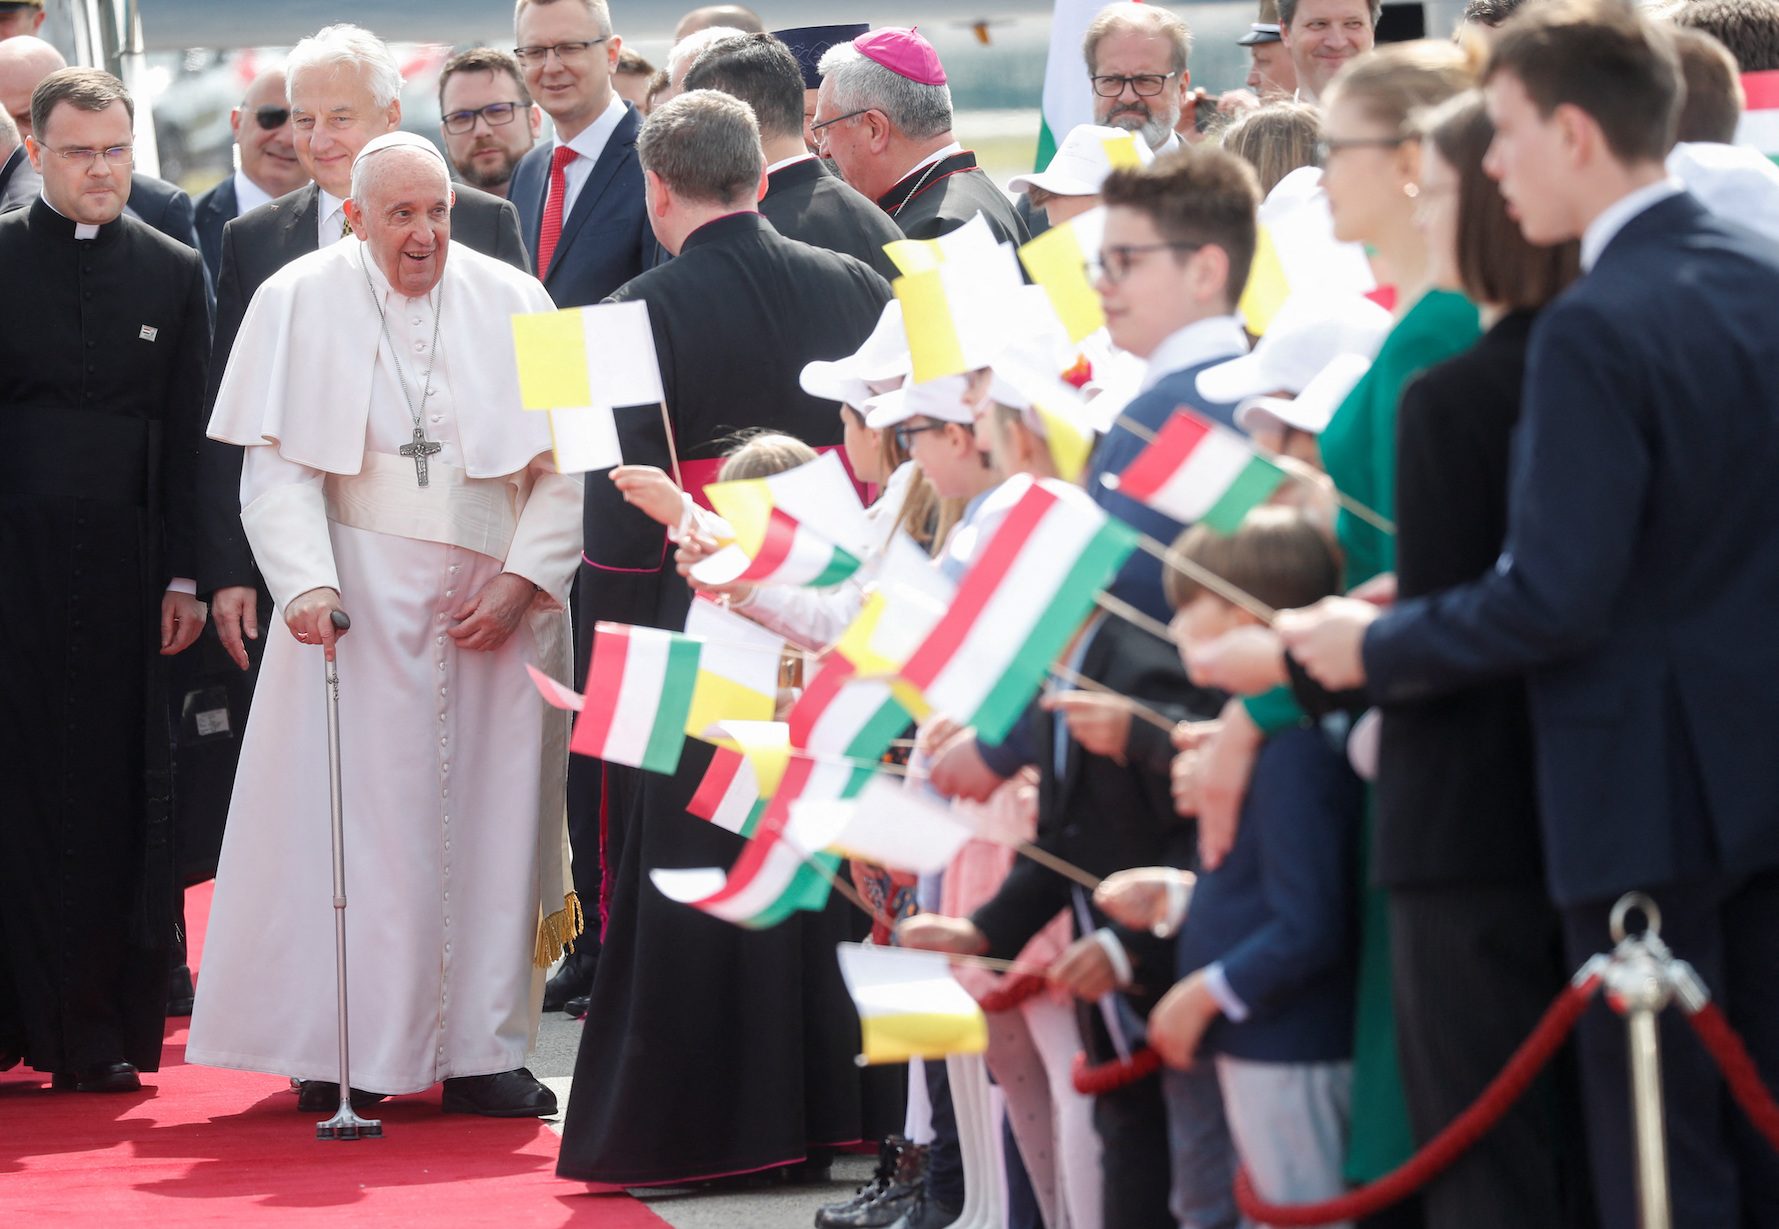 Pope Francis arrives in Hungary with Ukraine, migration topping agenda